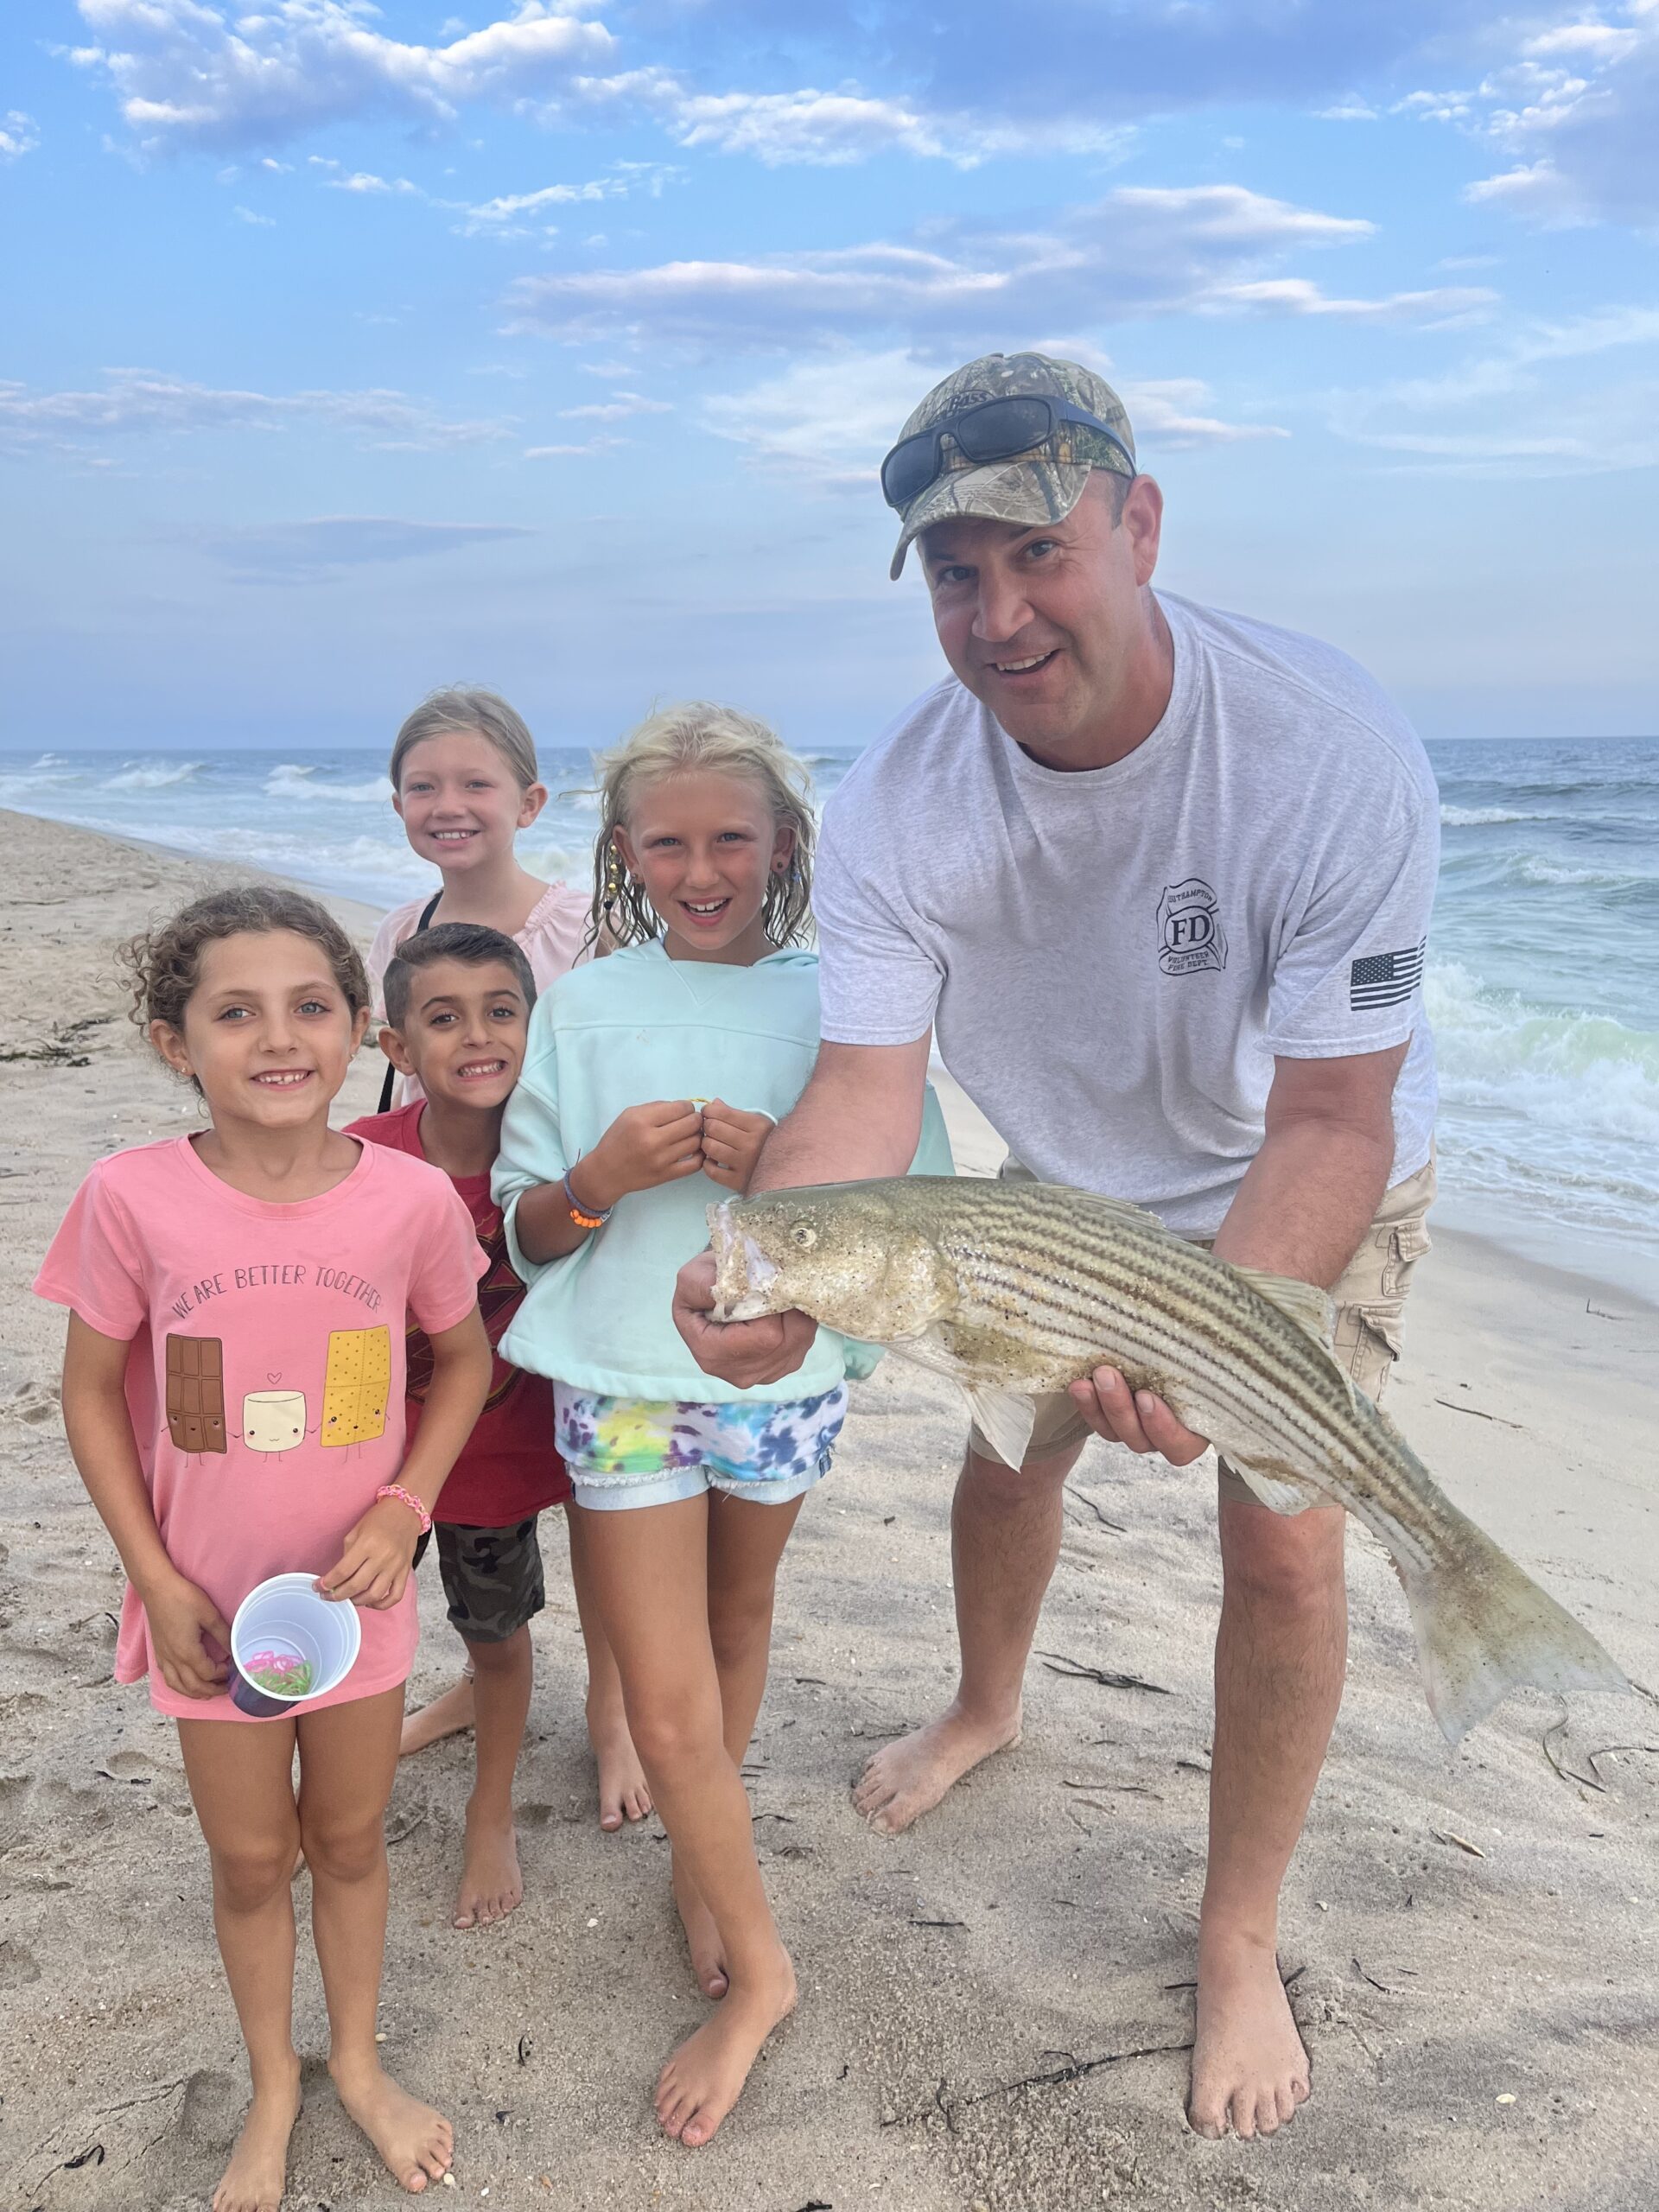 Nadia Almansa, Gabe Almansa, Maeve LeGuen and Avery Armusewicz got a kick out of seeing Chris Capalbo land this schoolie striped bass from the beach in Southampton recently.